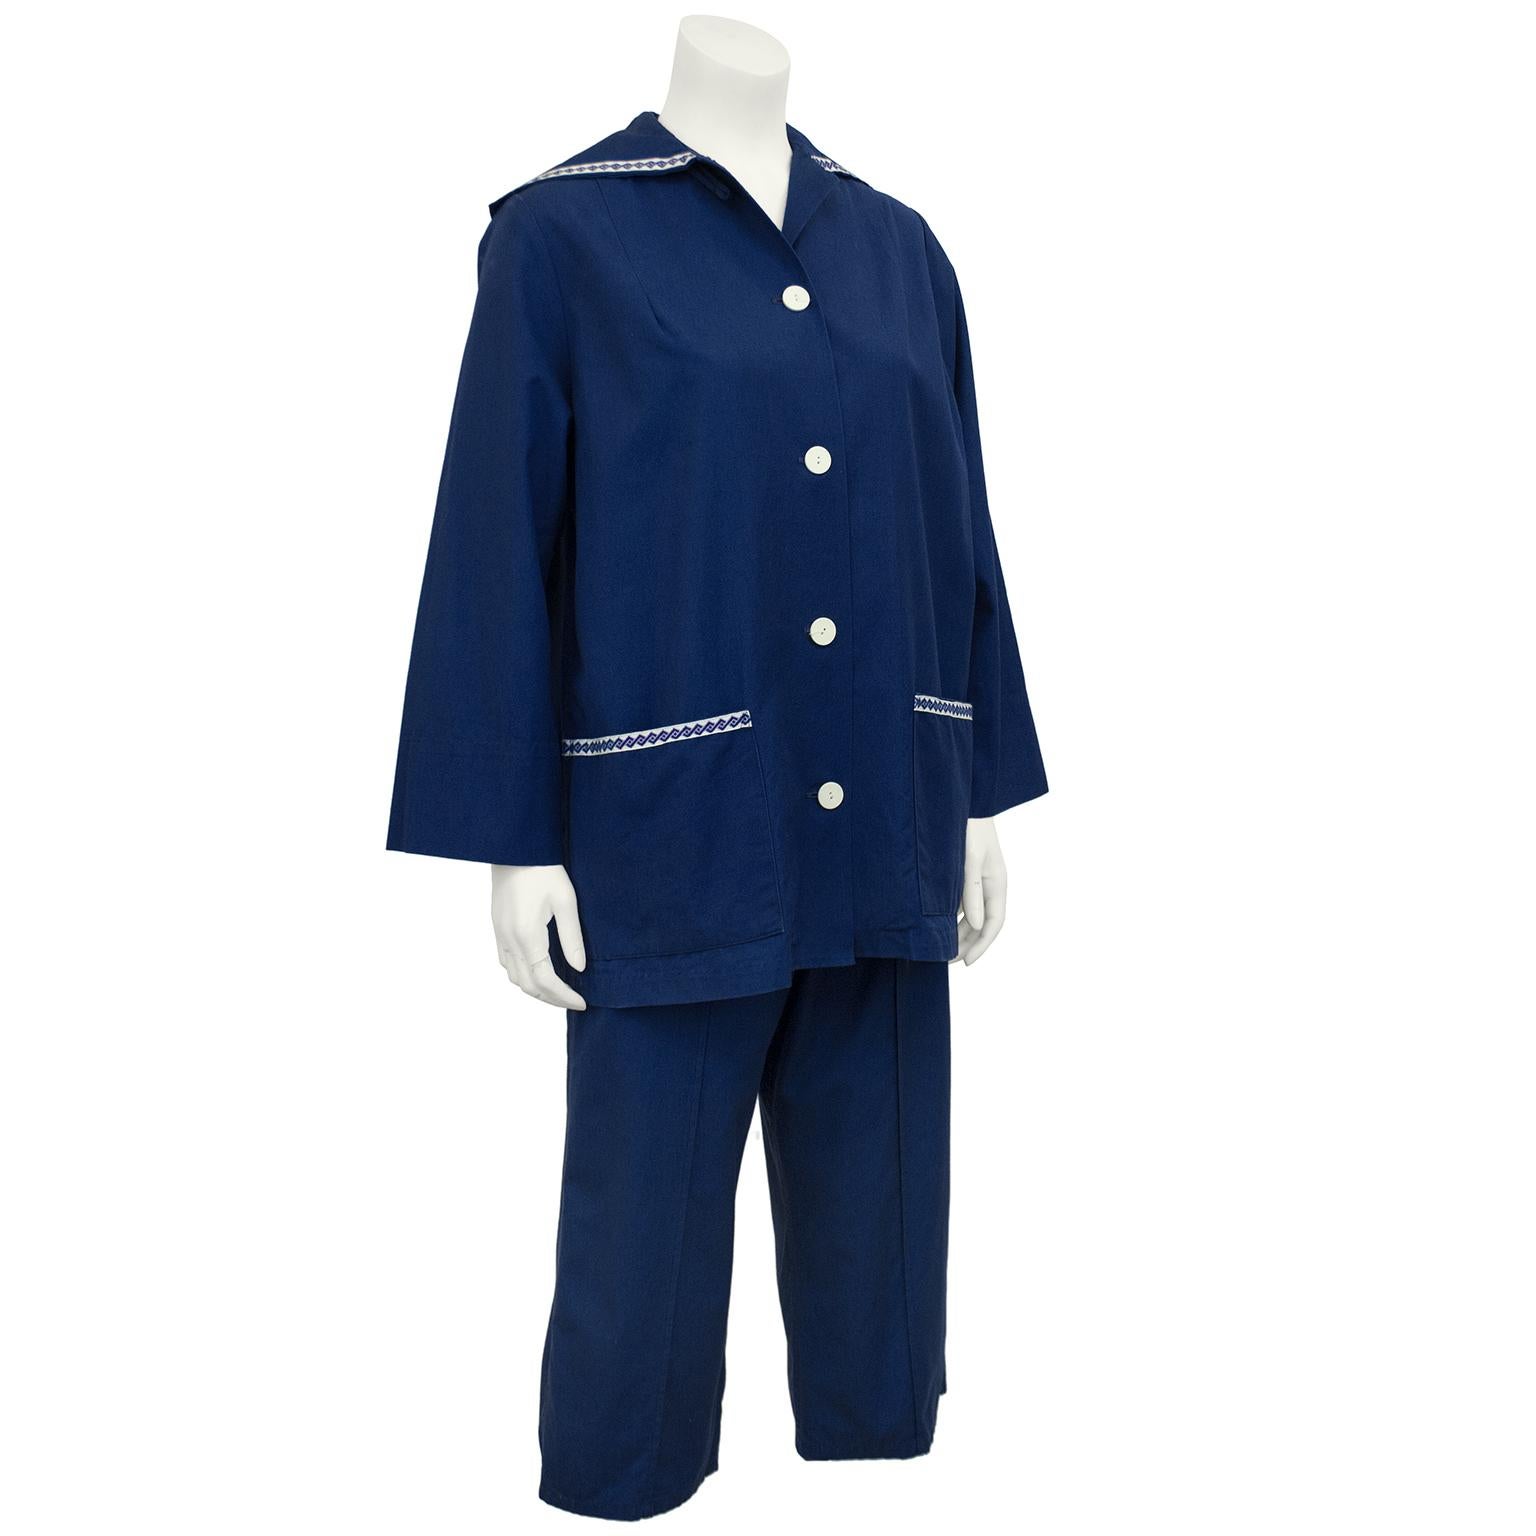 Adorable 1950s indigo cotton ensemble by the Portland, Oregon based label White Stag. The boxy style jacket has a sailor collar, front pockets trimmed in white ribbon with blue square pattern detail and white buttons down the front. The high waisted